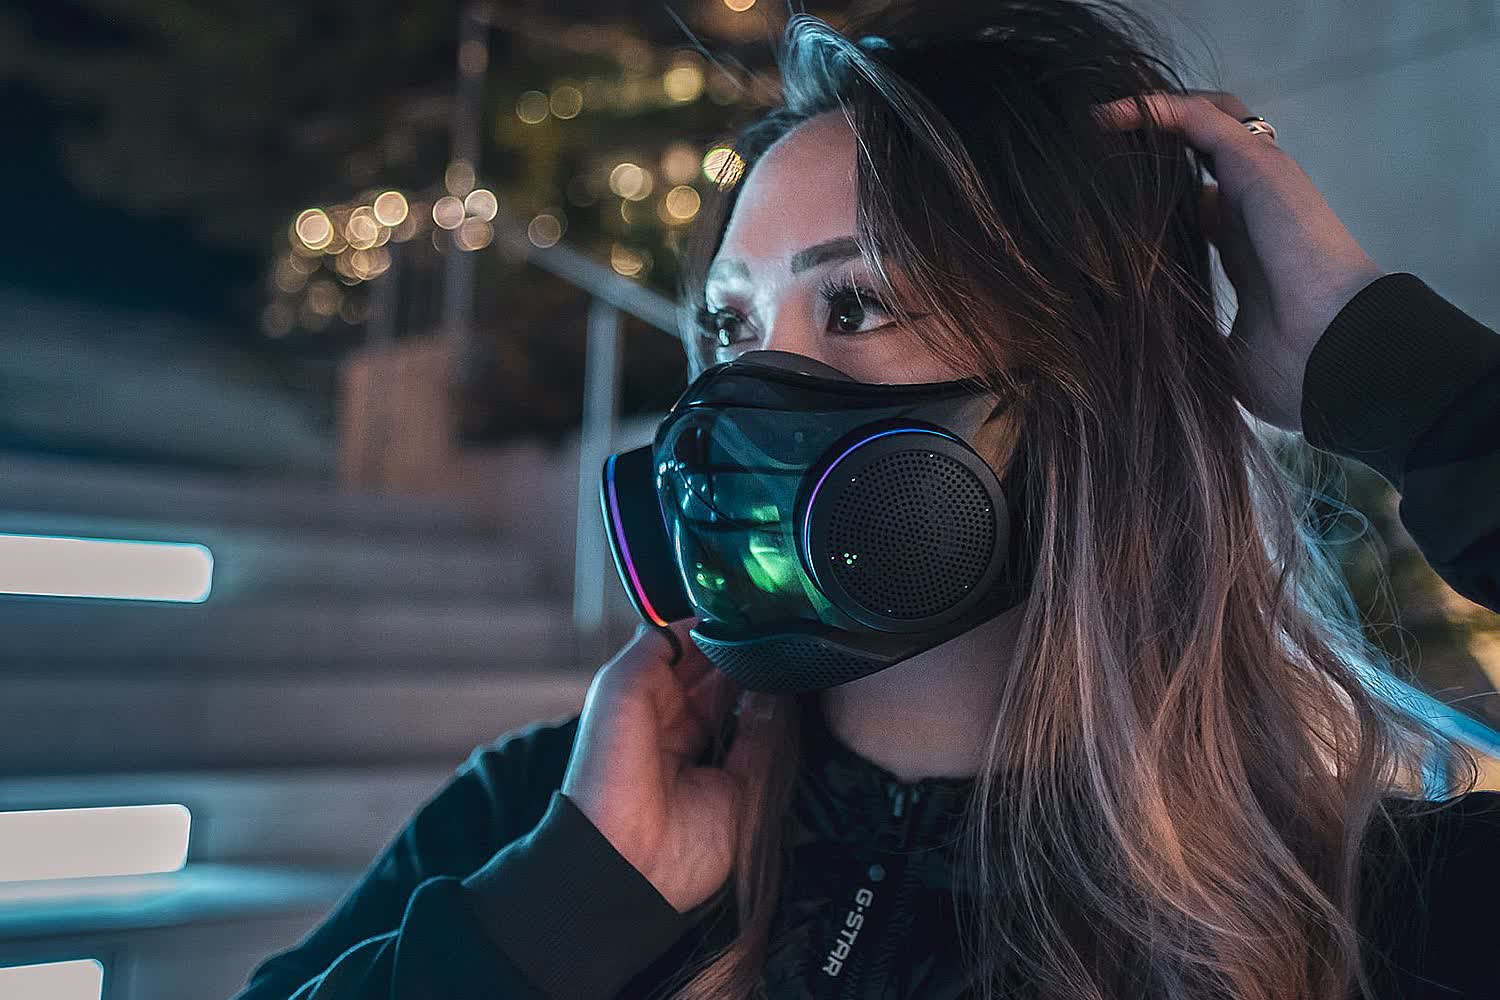 Razer's Zephyr N95 facemask sold out 'within minutes' of going on sale, but were bots to blame?